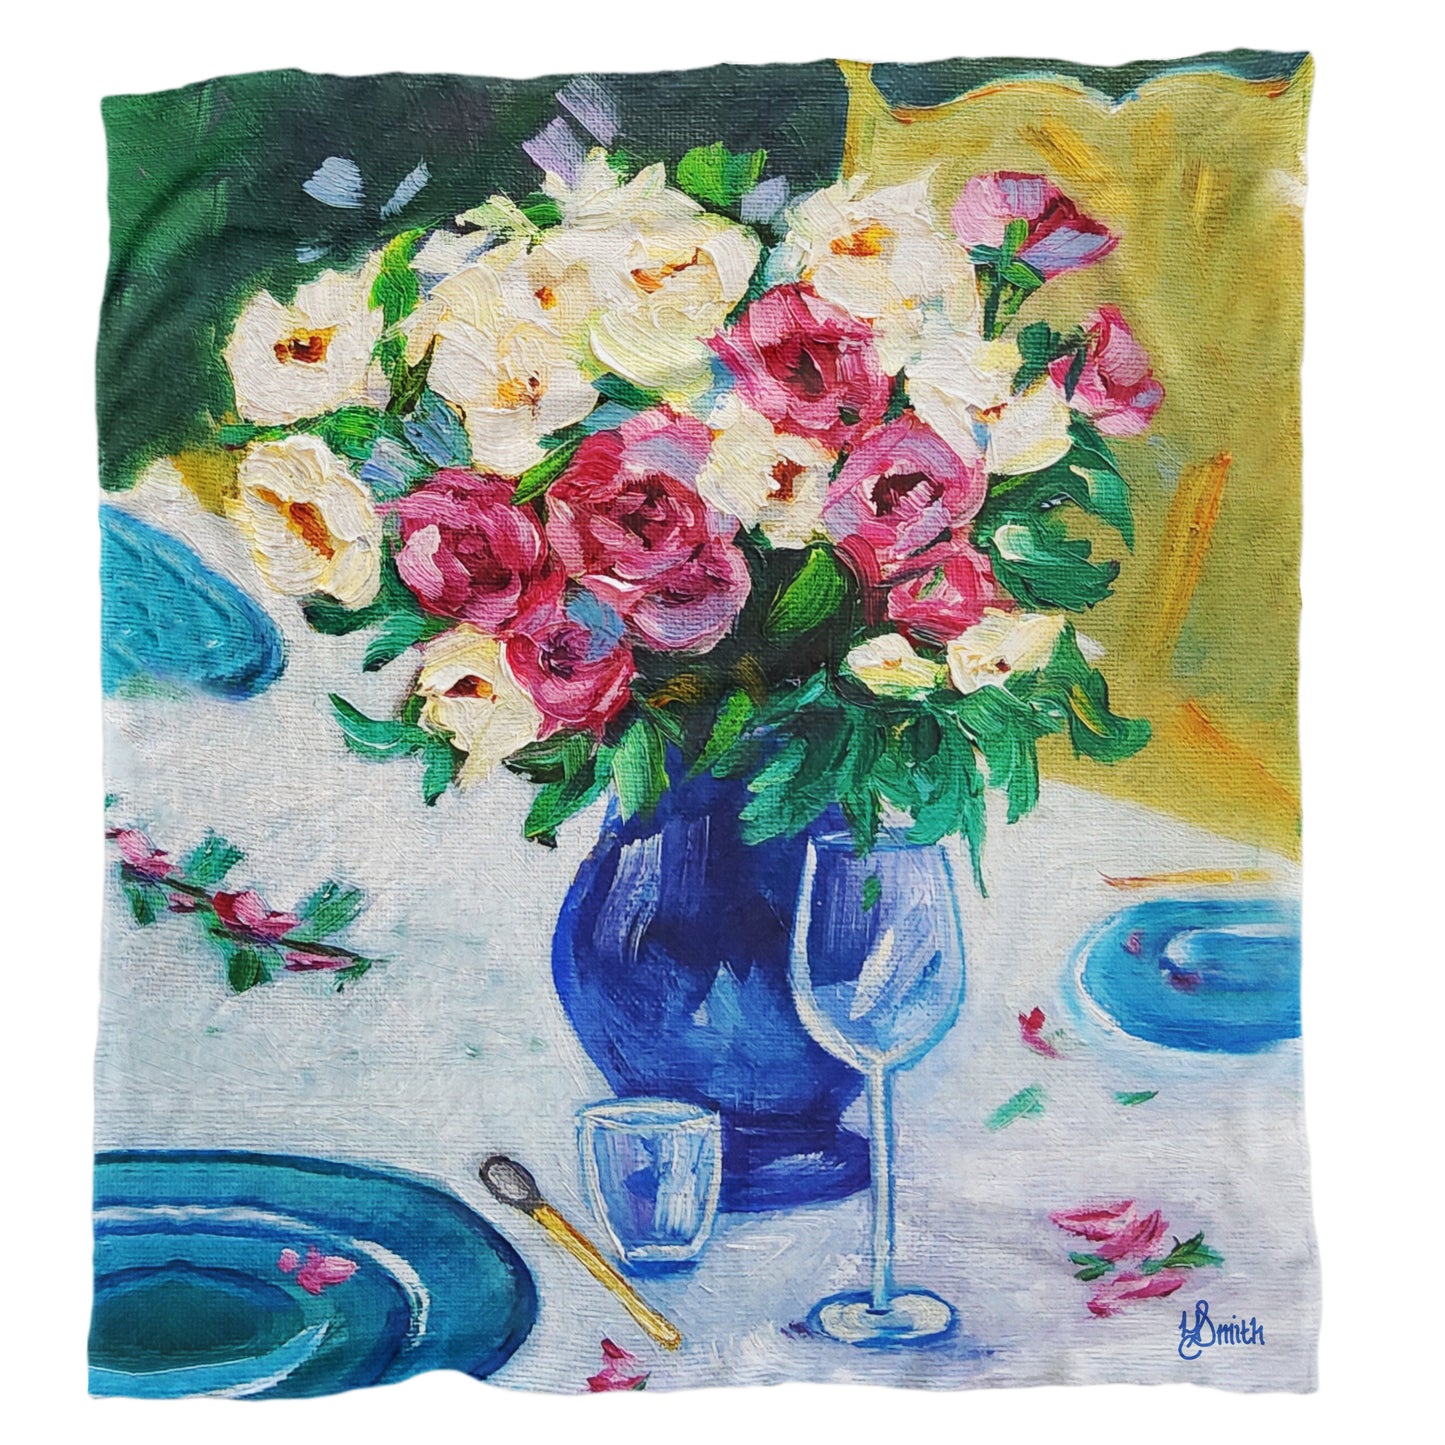 Table with Flowers Light Weight Fleece Blanket by Yolande Smith